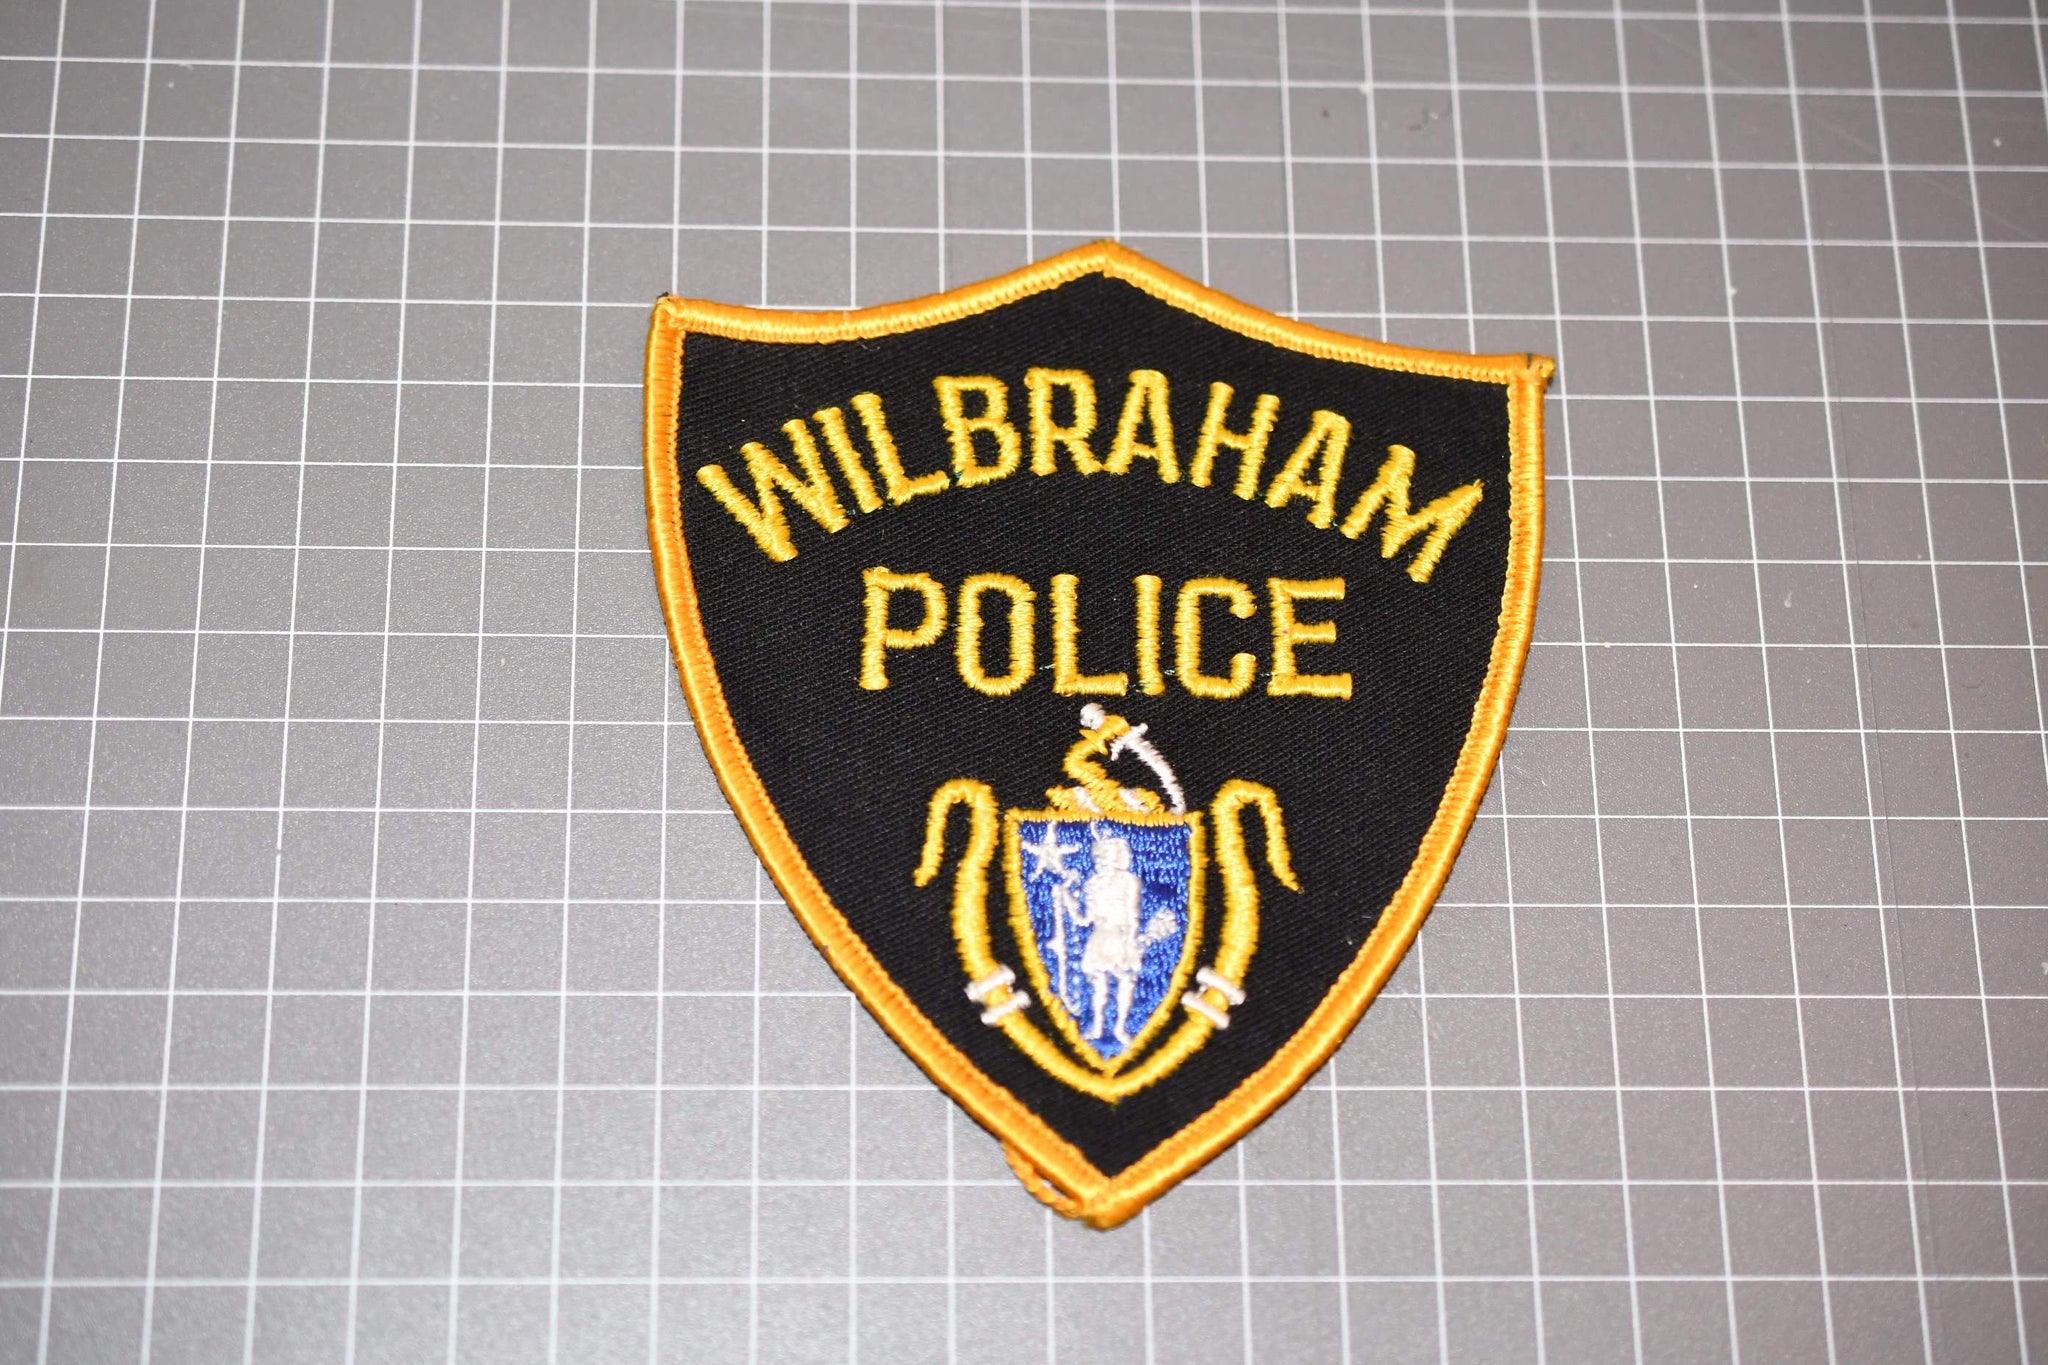 Wilbraham Massachusetts Police Patch (U.S. Police Patches)